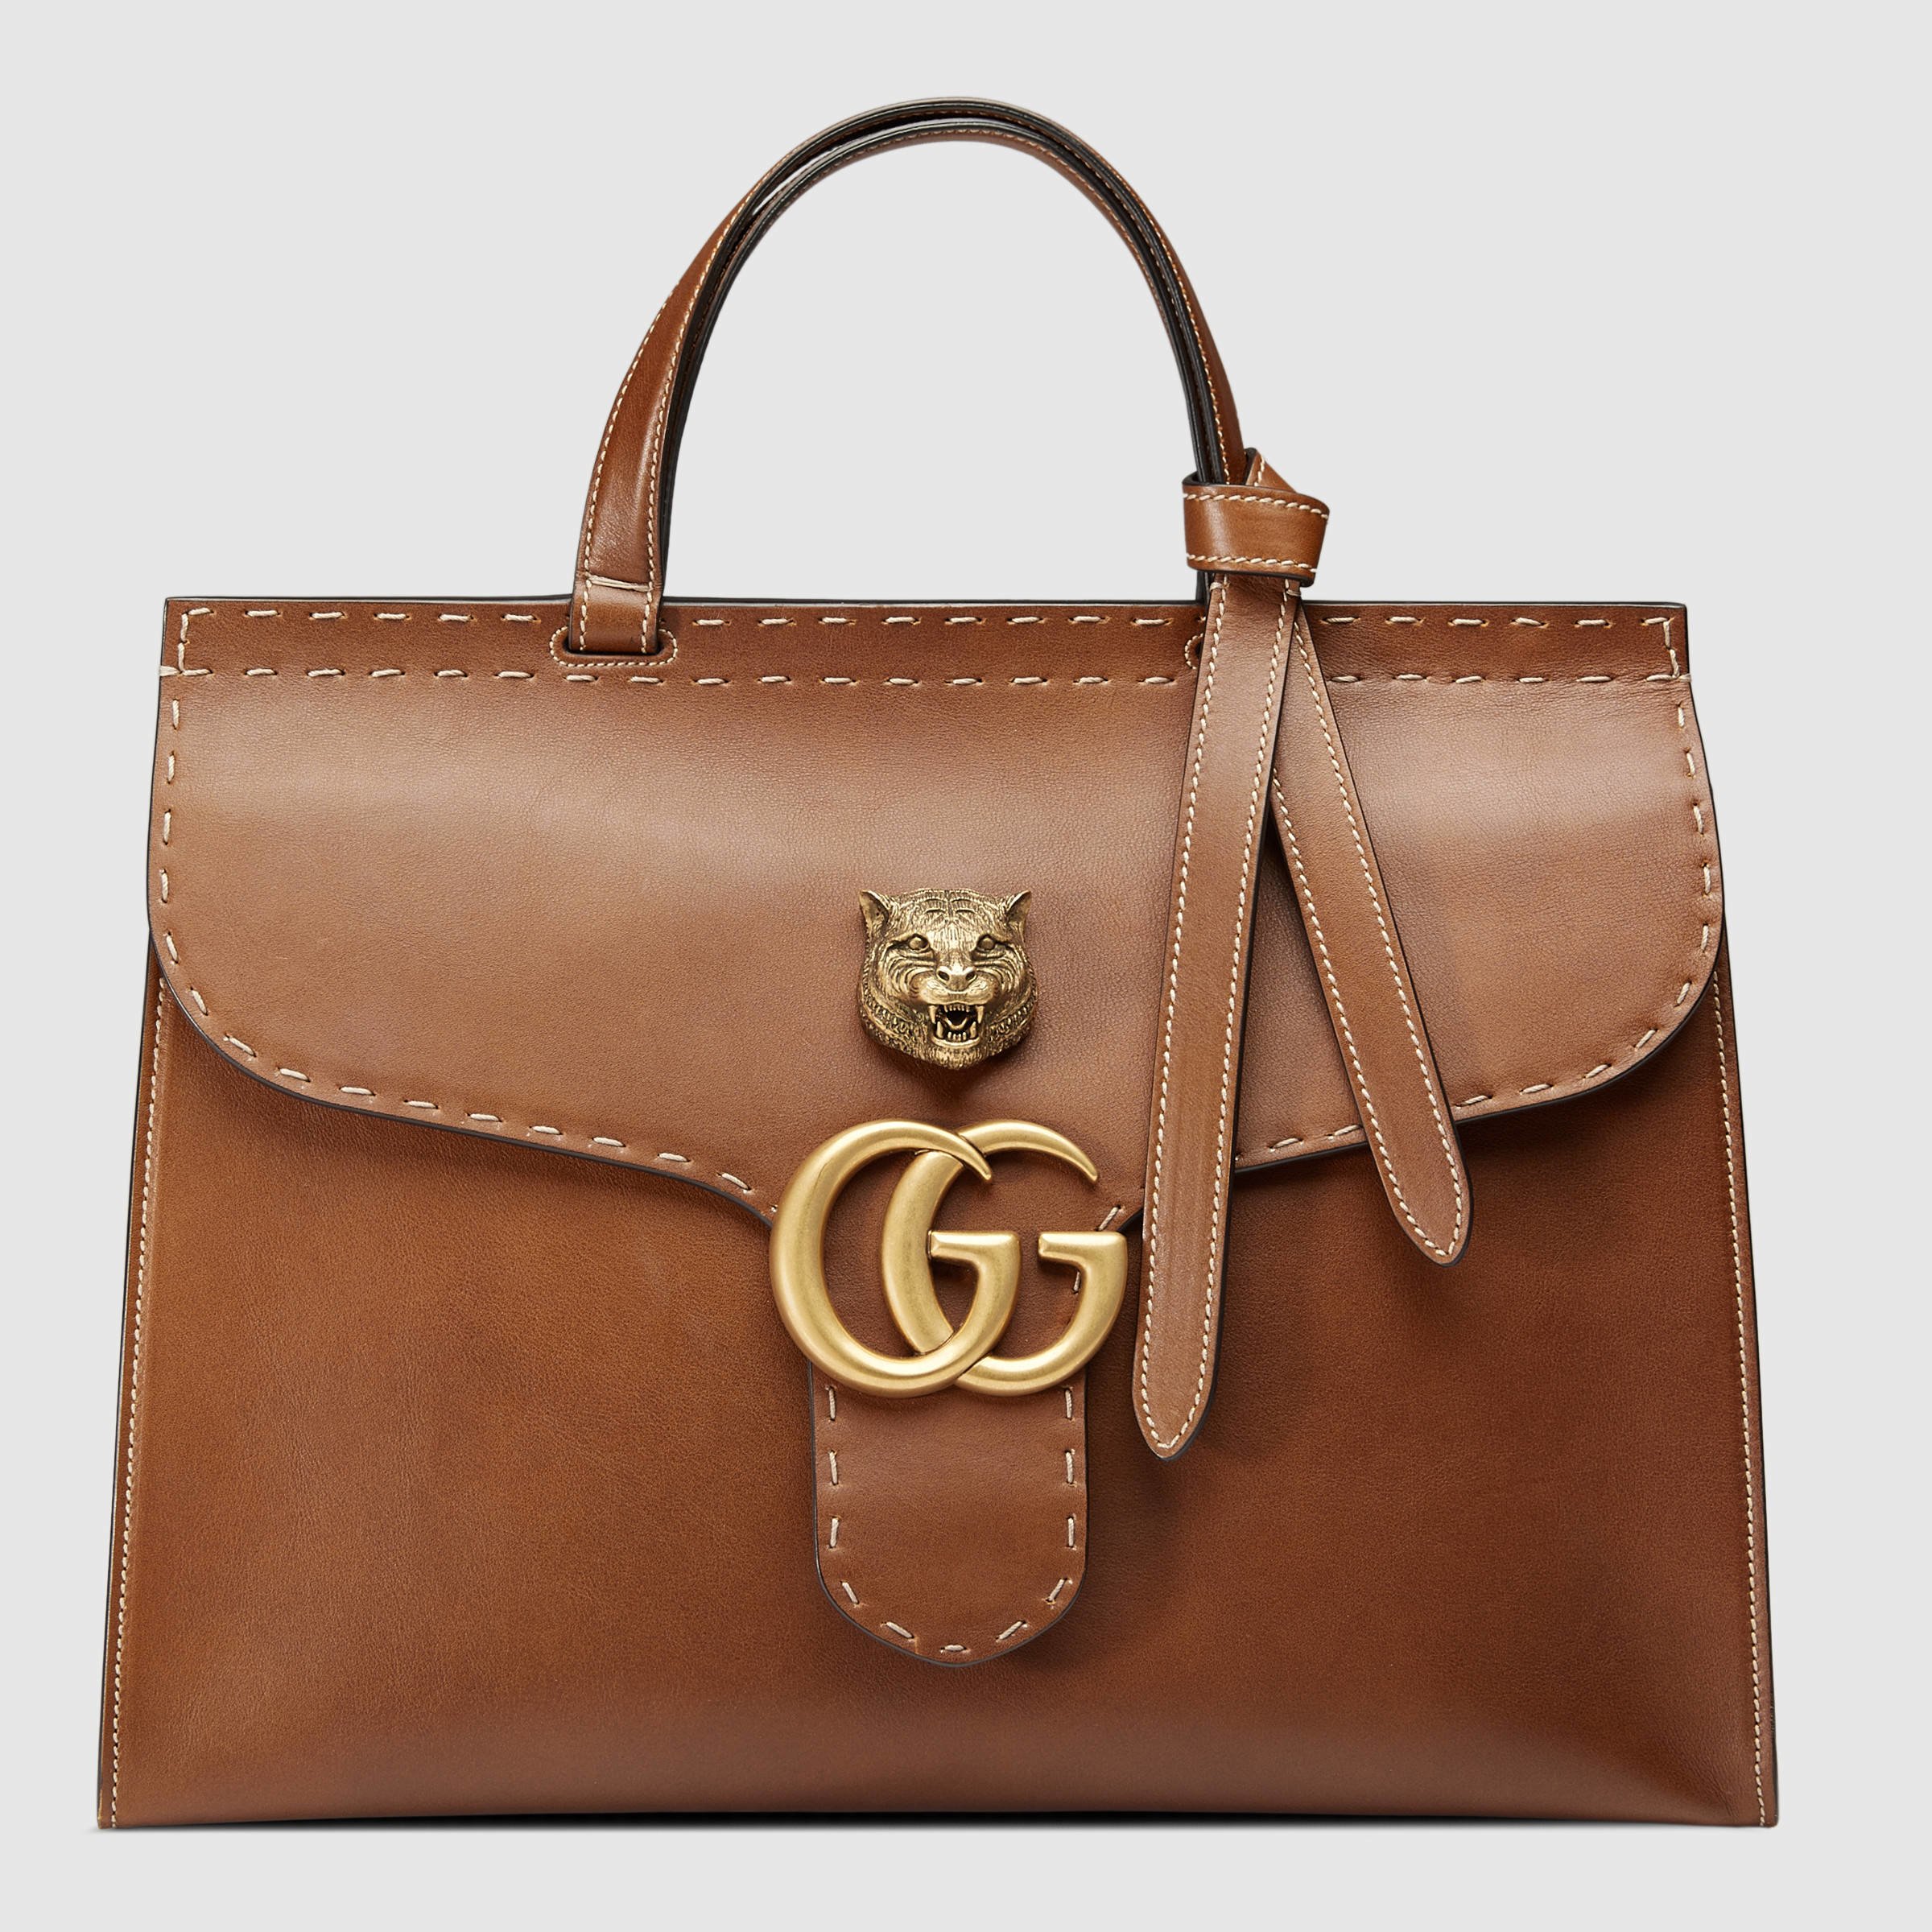 Gucci GG Marmont Leather Top Handle Bag in Brown | Lyst